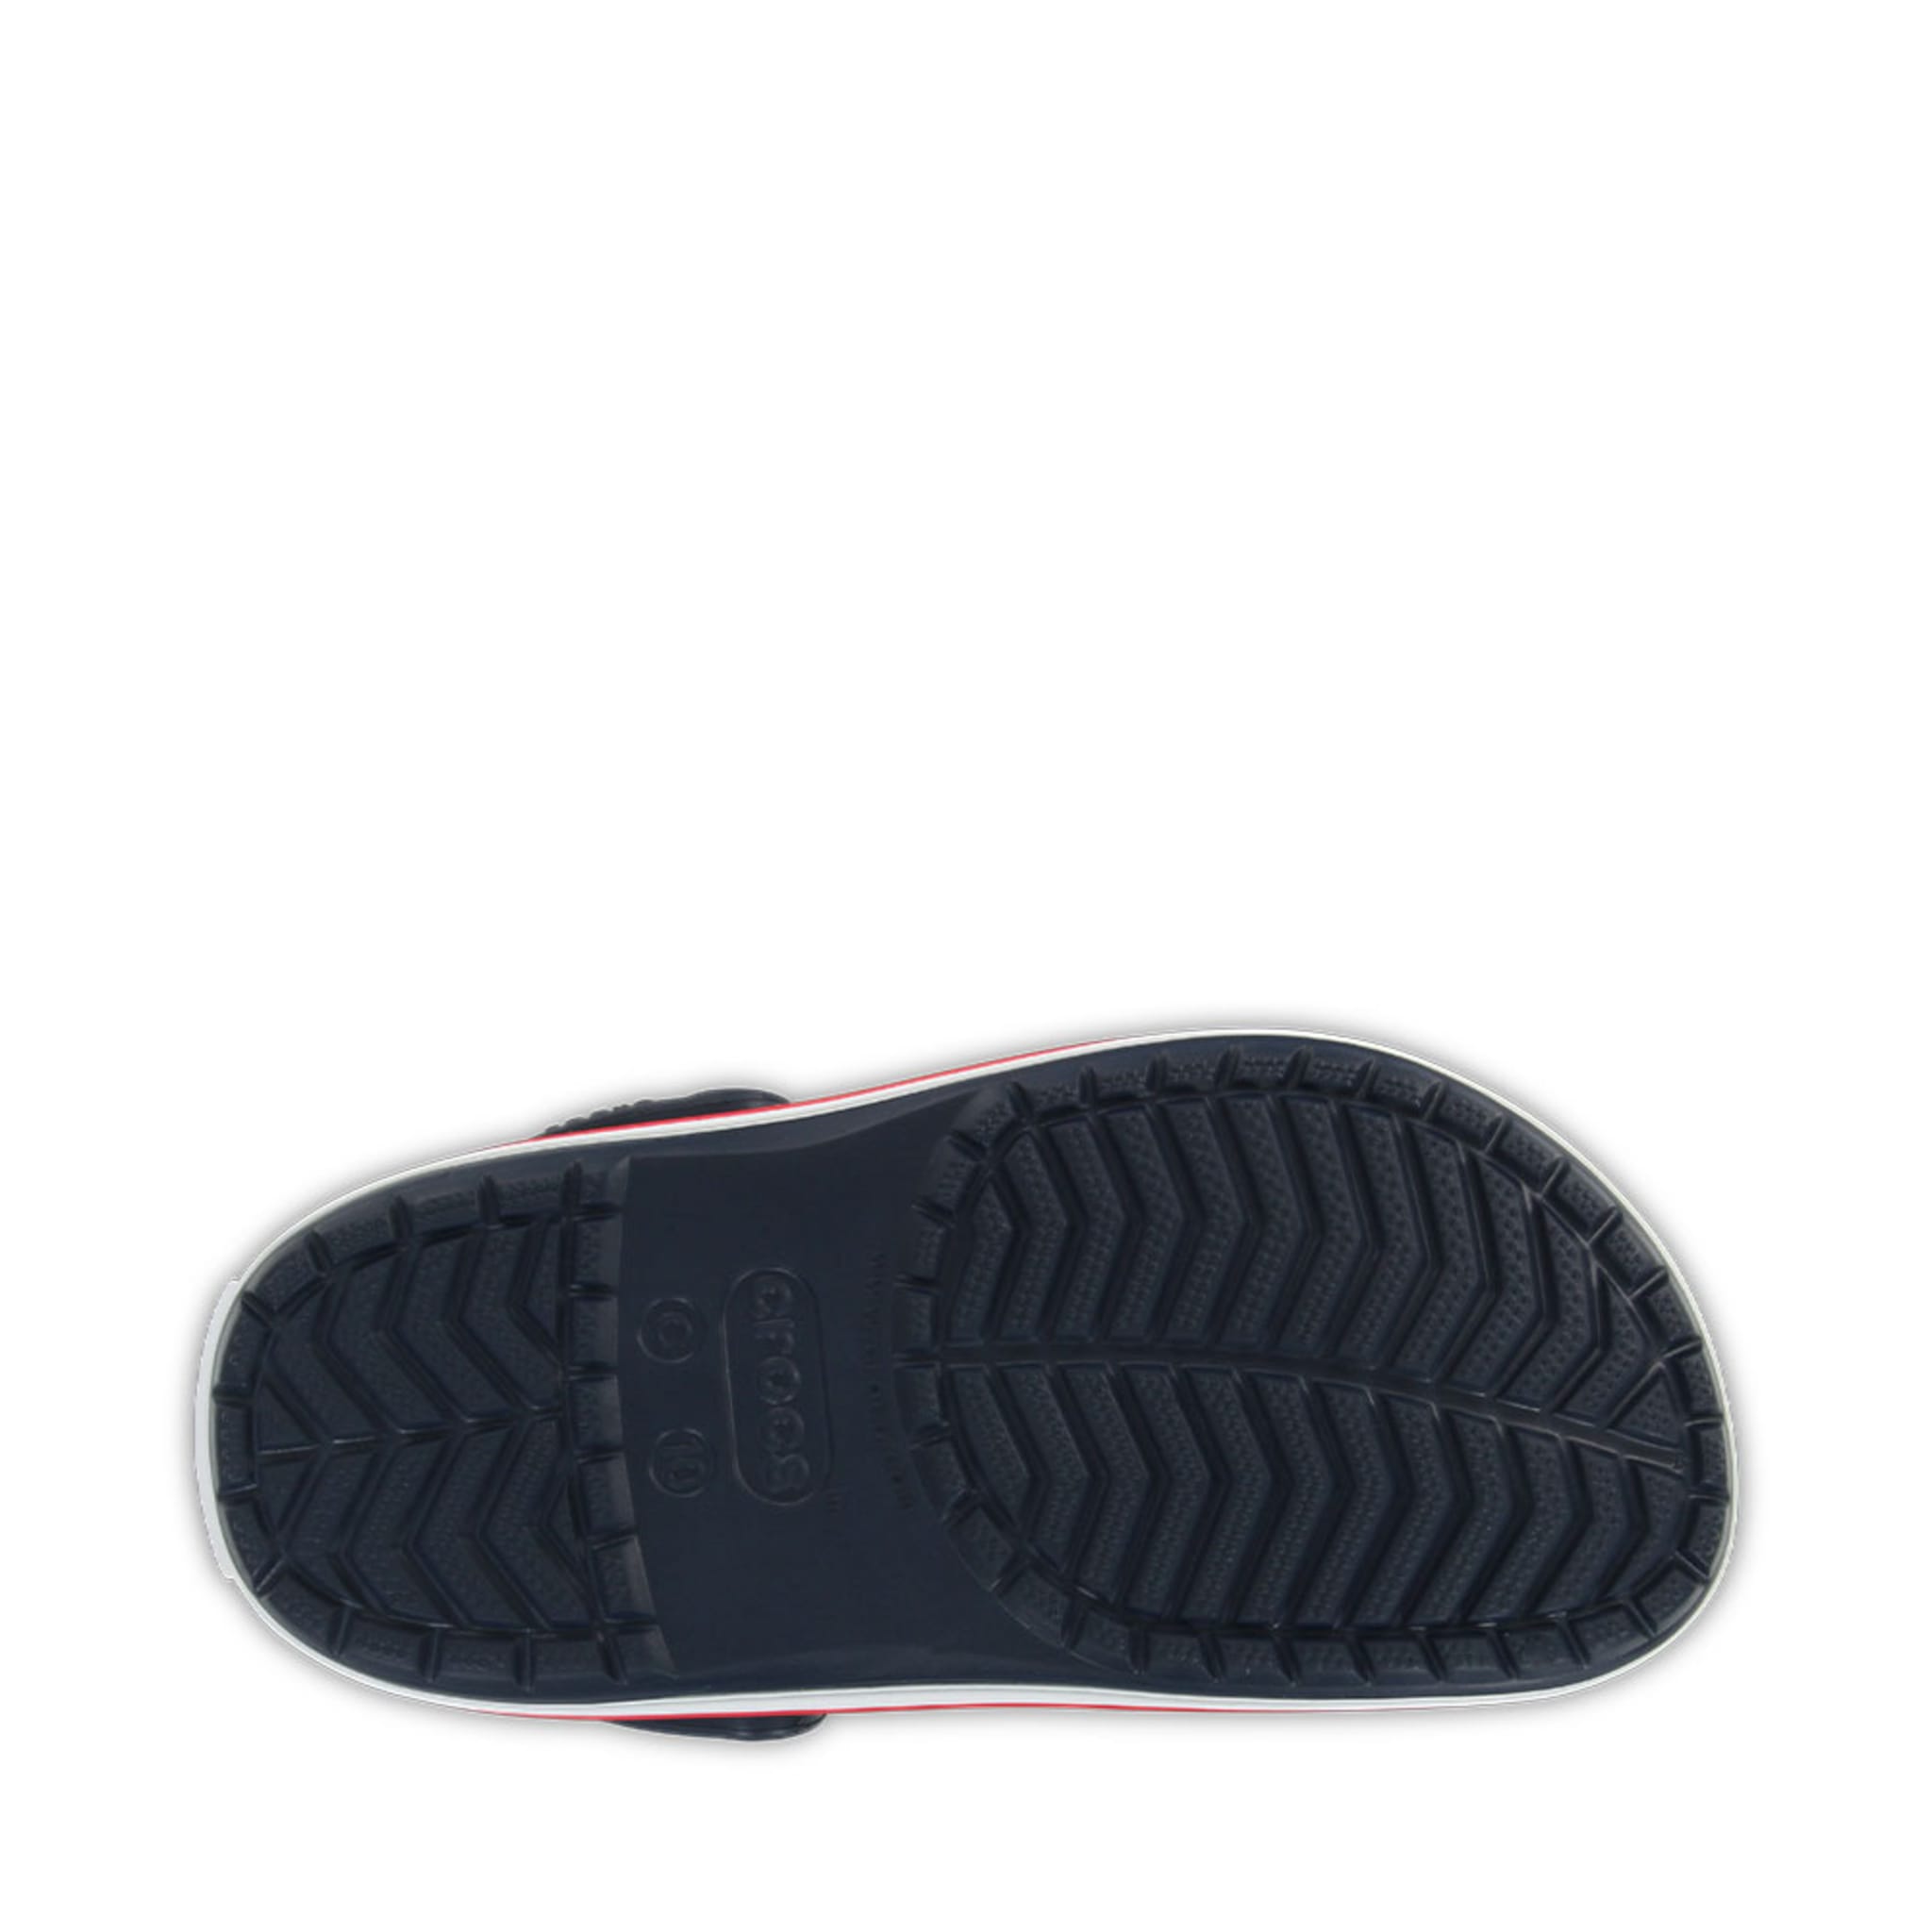 Crocband Clog T, Navy/Red